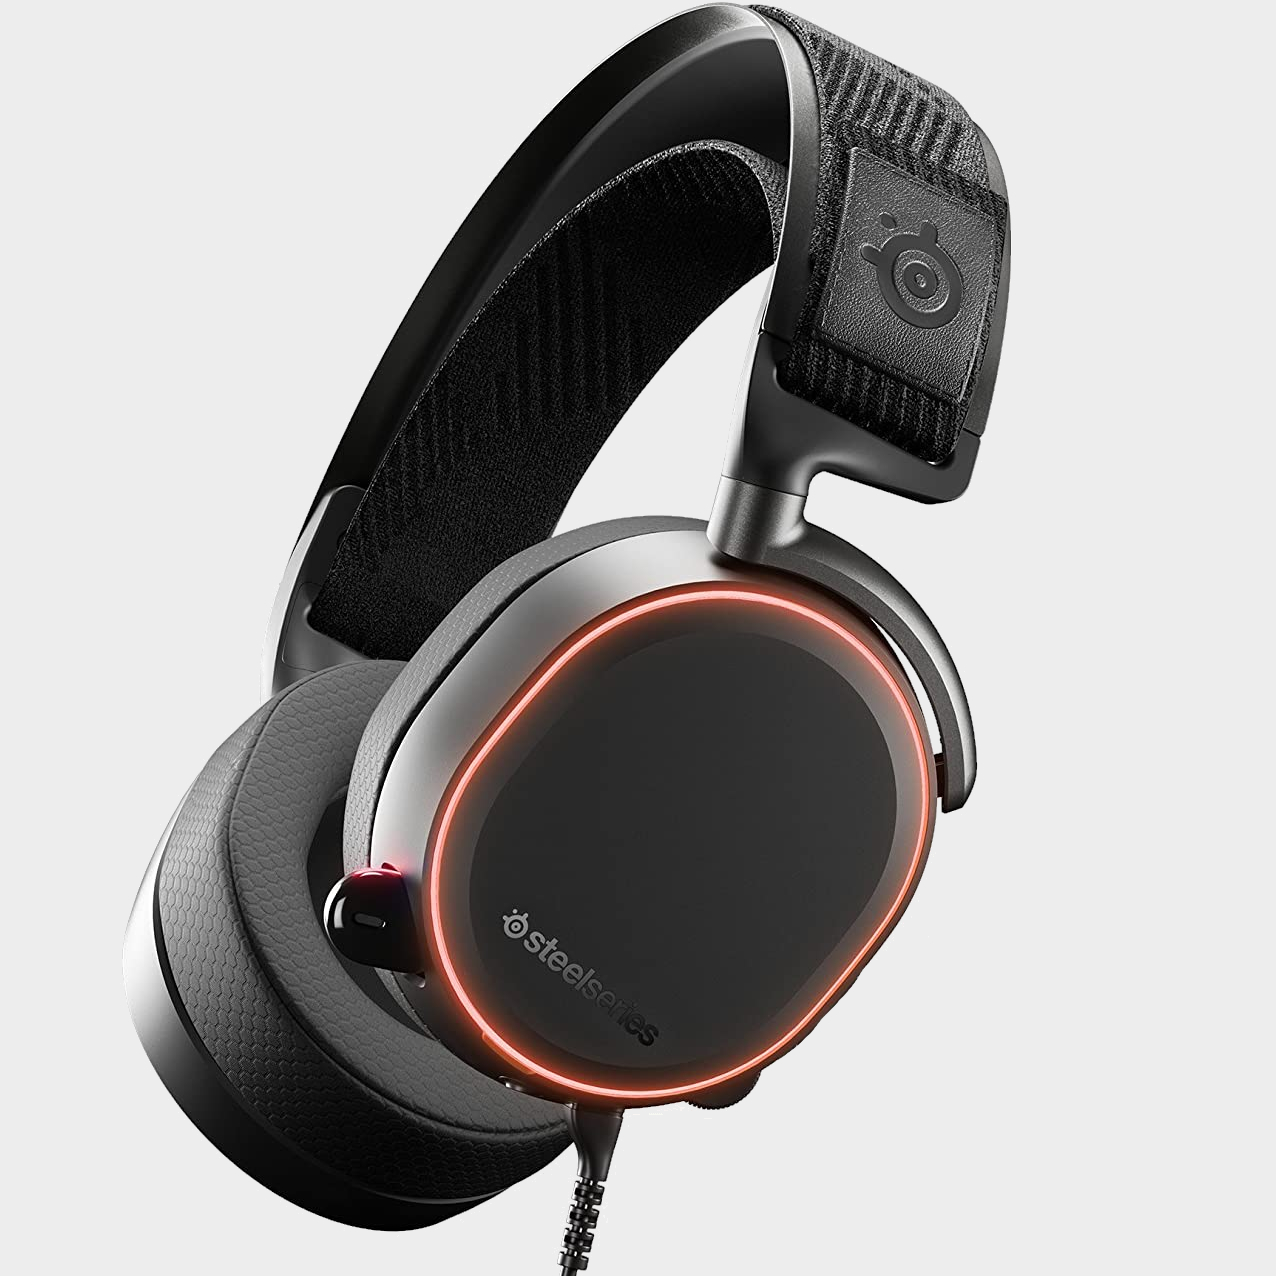 SteelSeries Black Friday gaming headset deals come with up to 90 off